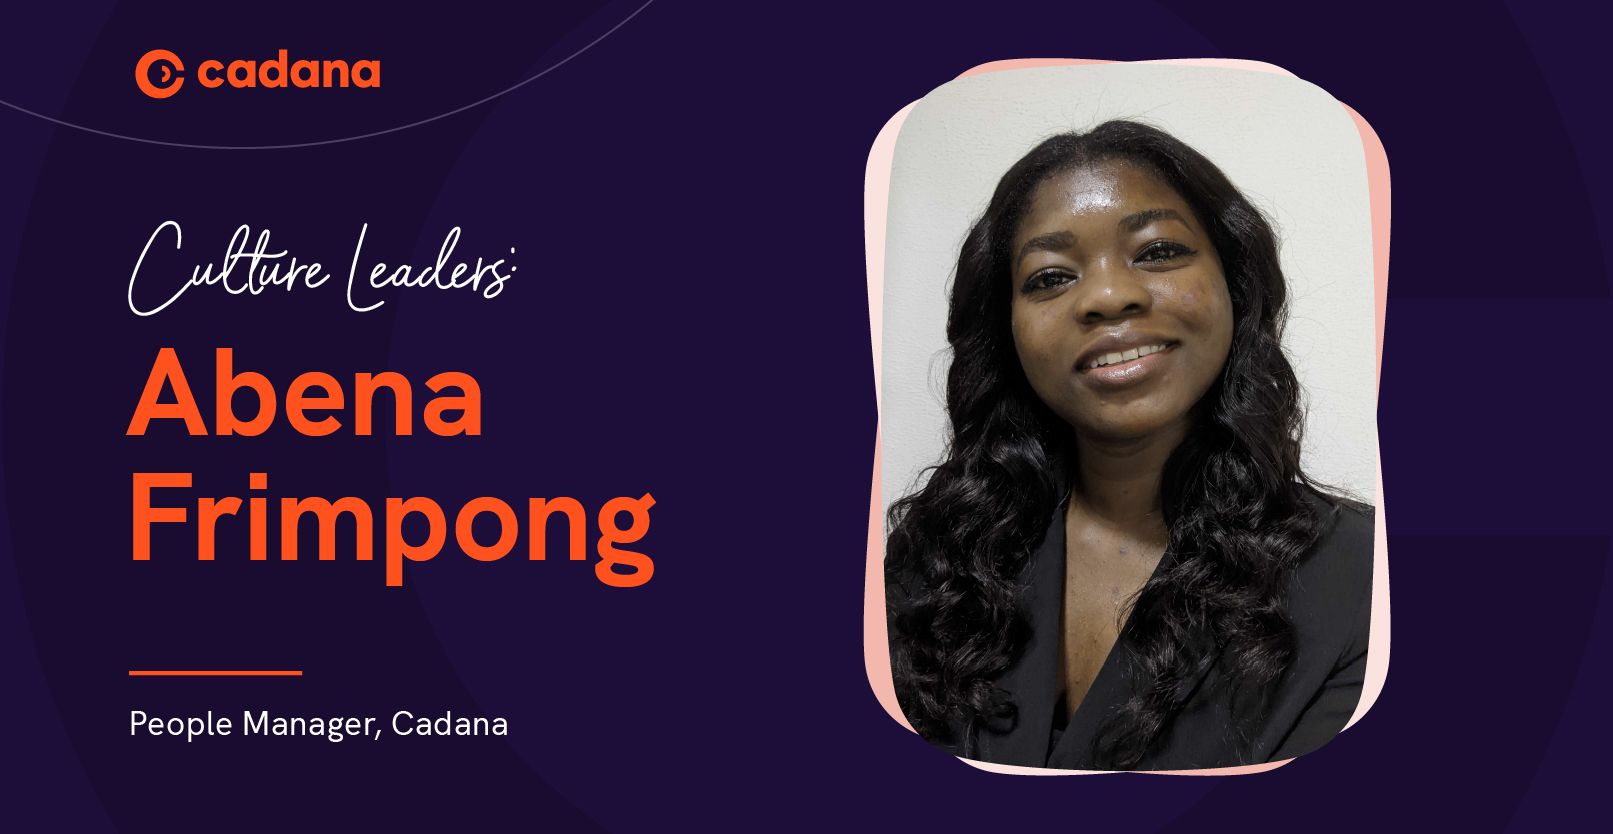 Culture Leaders: In Conversation with Cadana People Manager Abena Frimpong